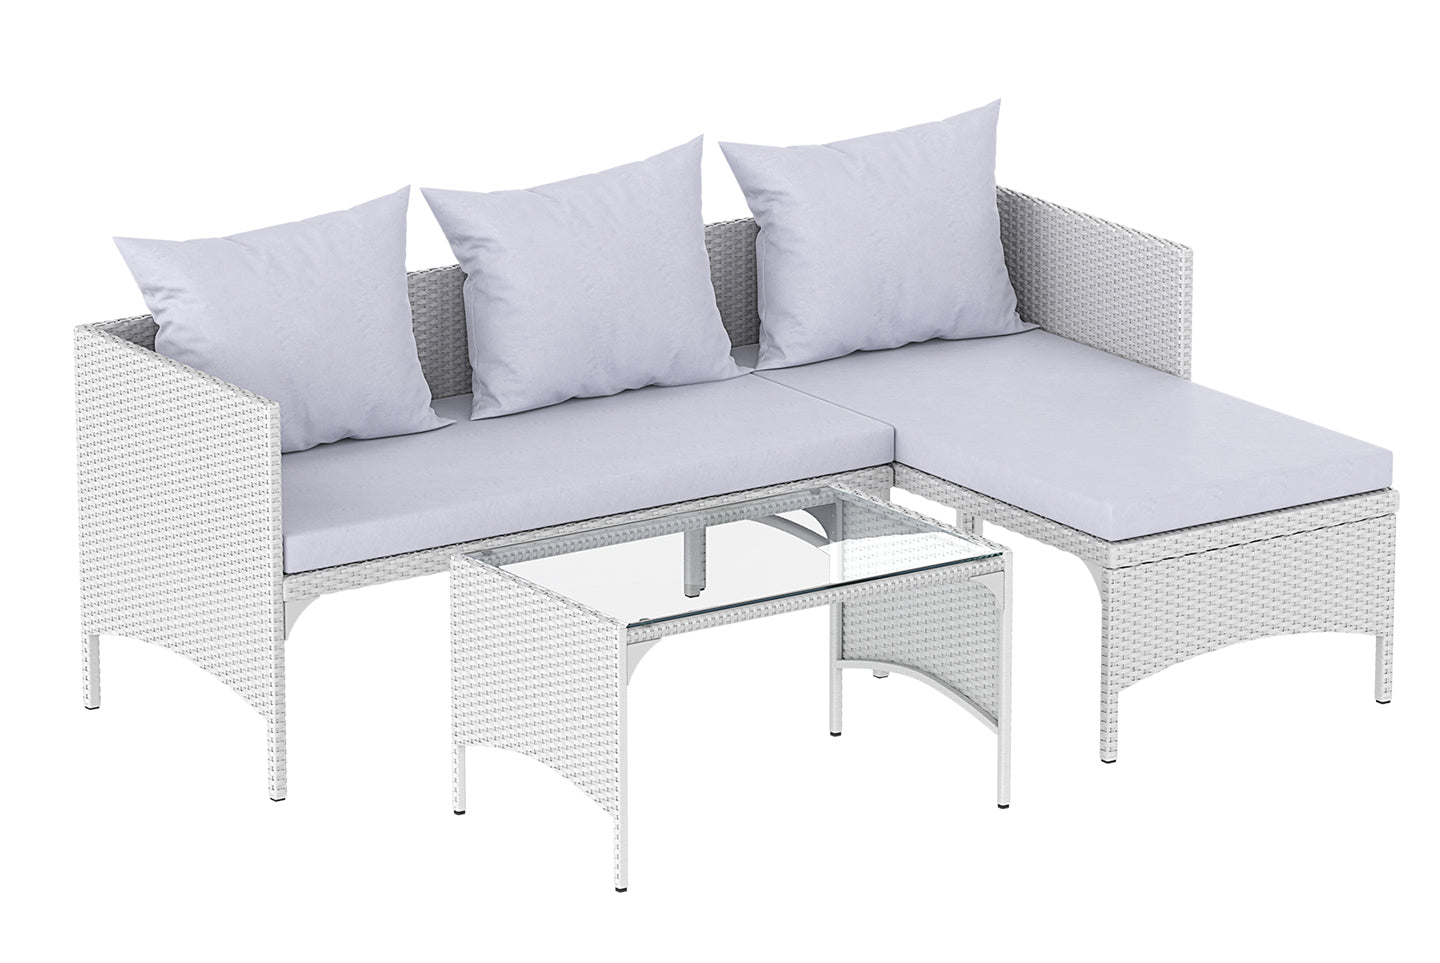 3 Piece Outdoor Rattan Furniture Patio Sofa Set with Loveseat Lounge Chair Table Grey